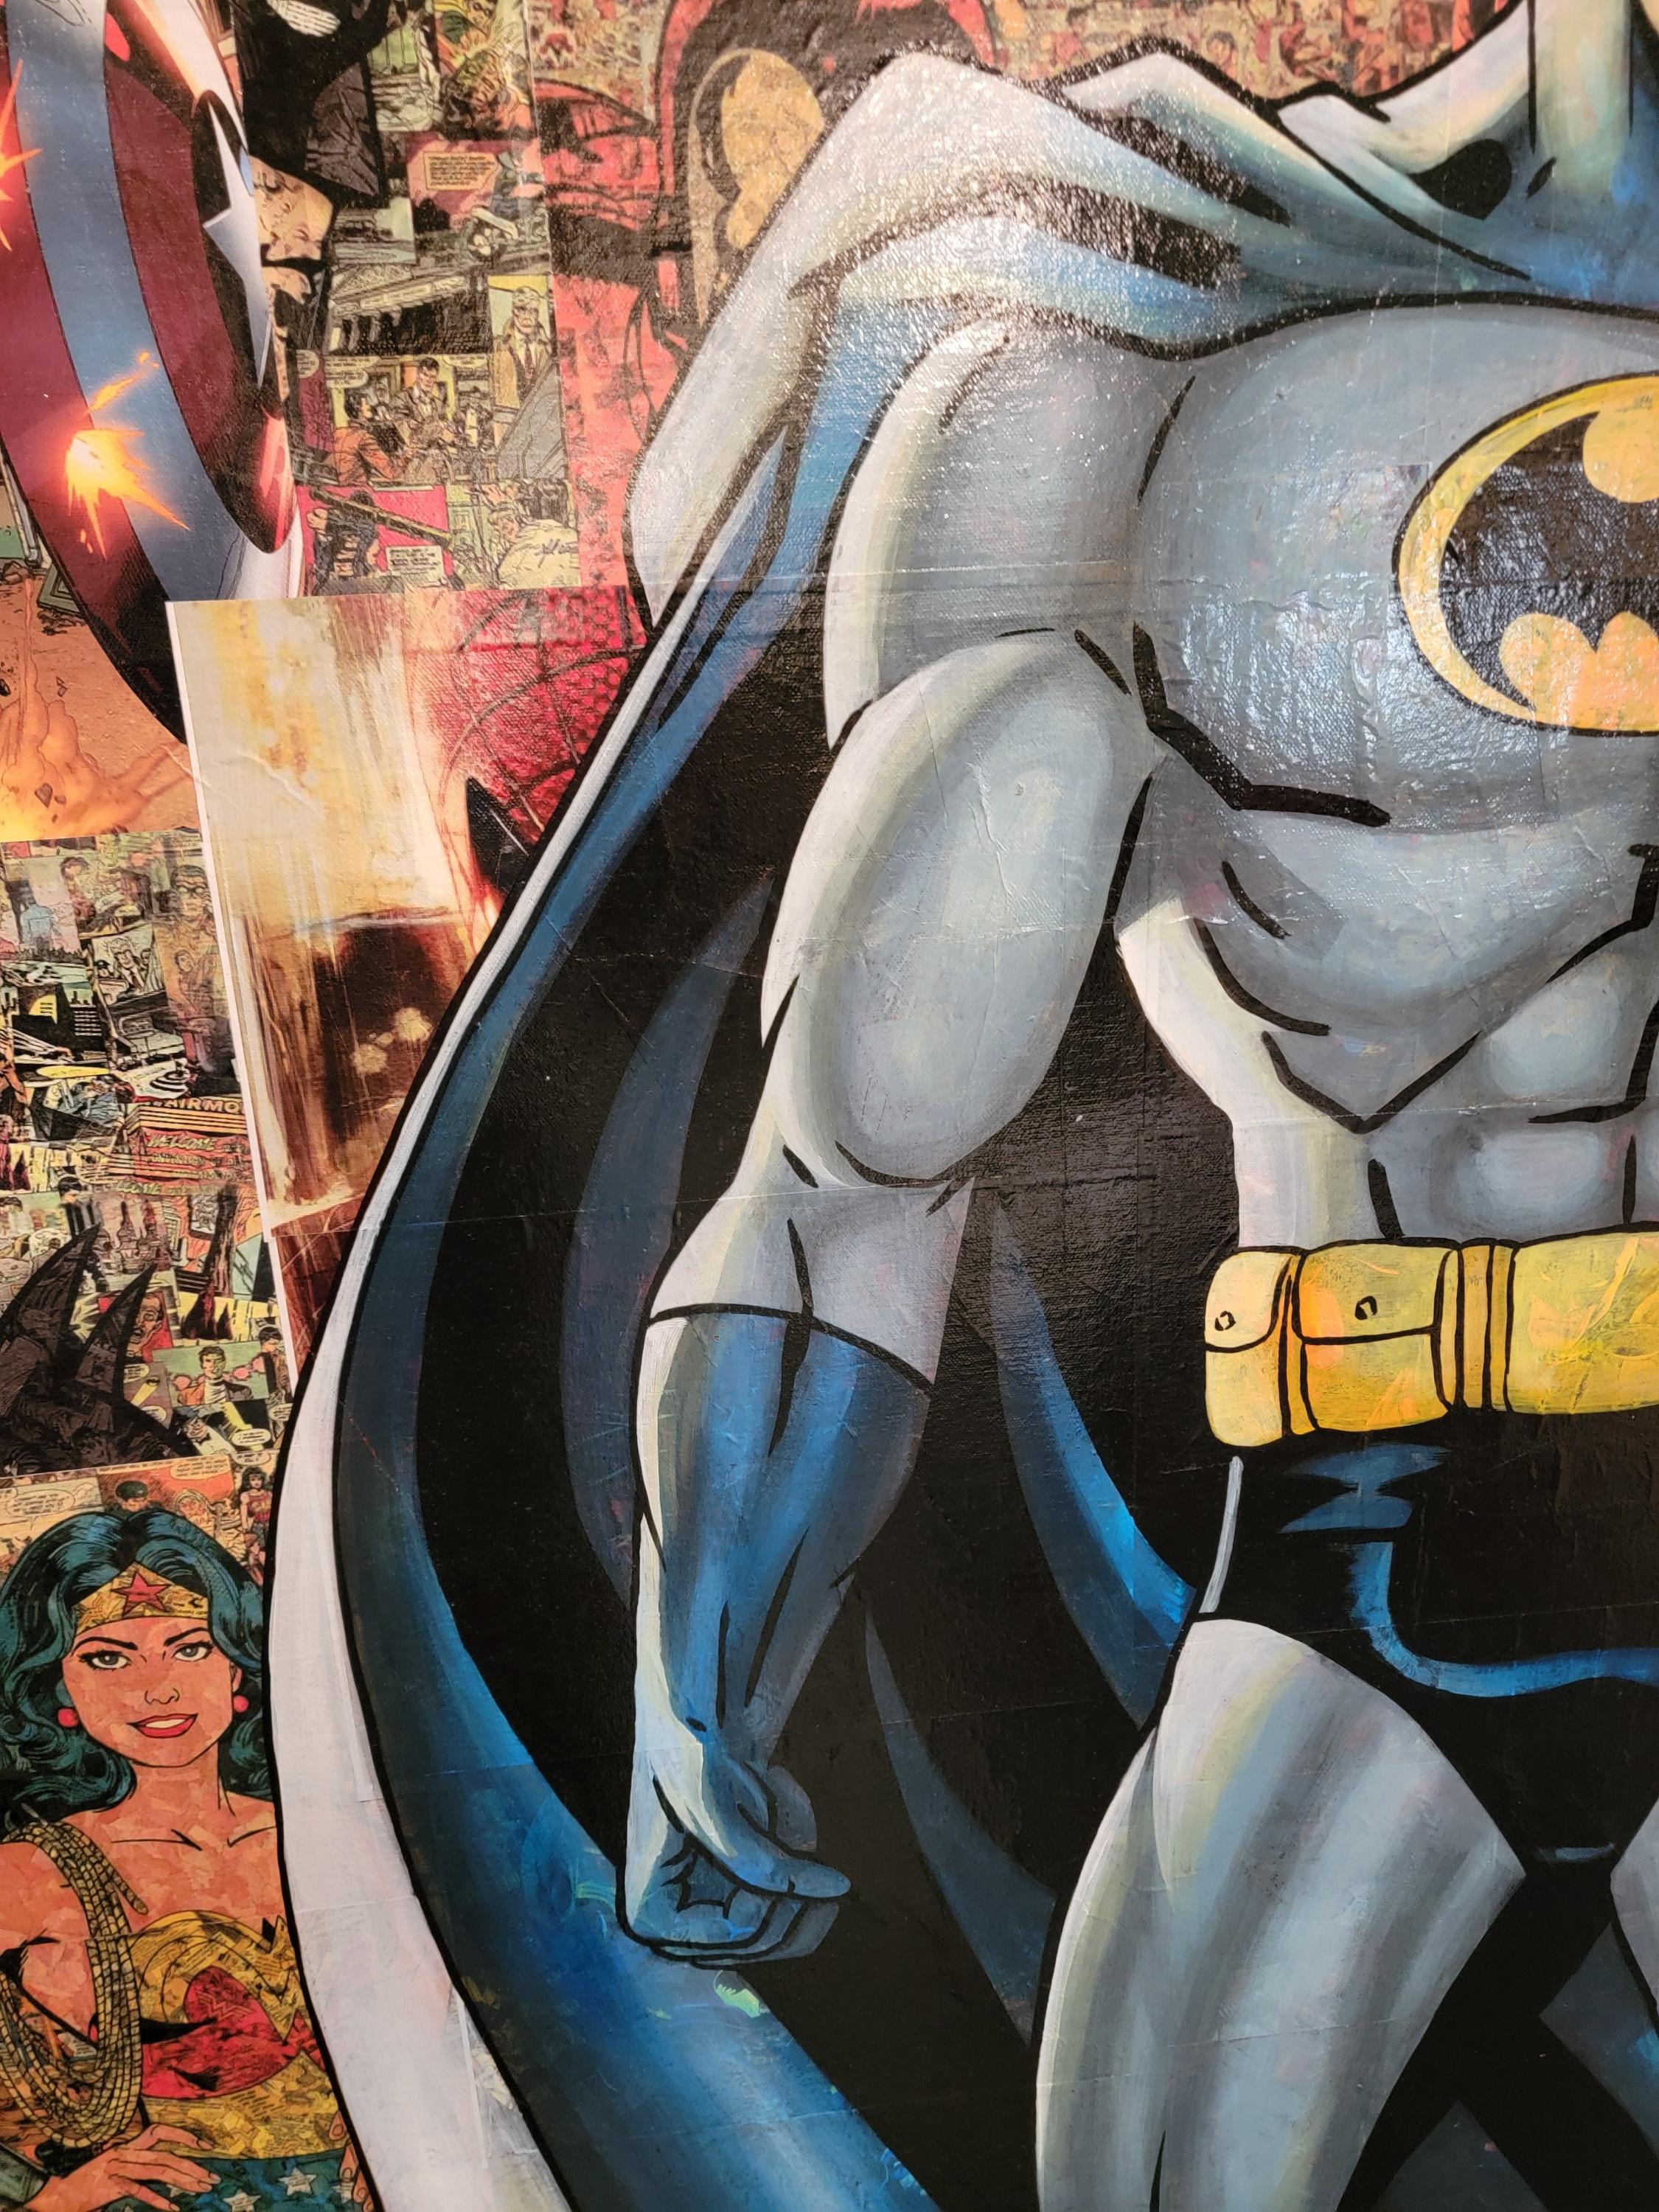 Large Comic Book Cut Outs Poster With Hand Painted Batman In Good Condition For Sale In Pasadena, CA